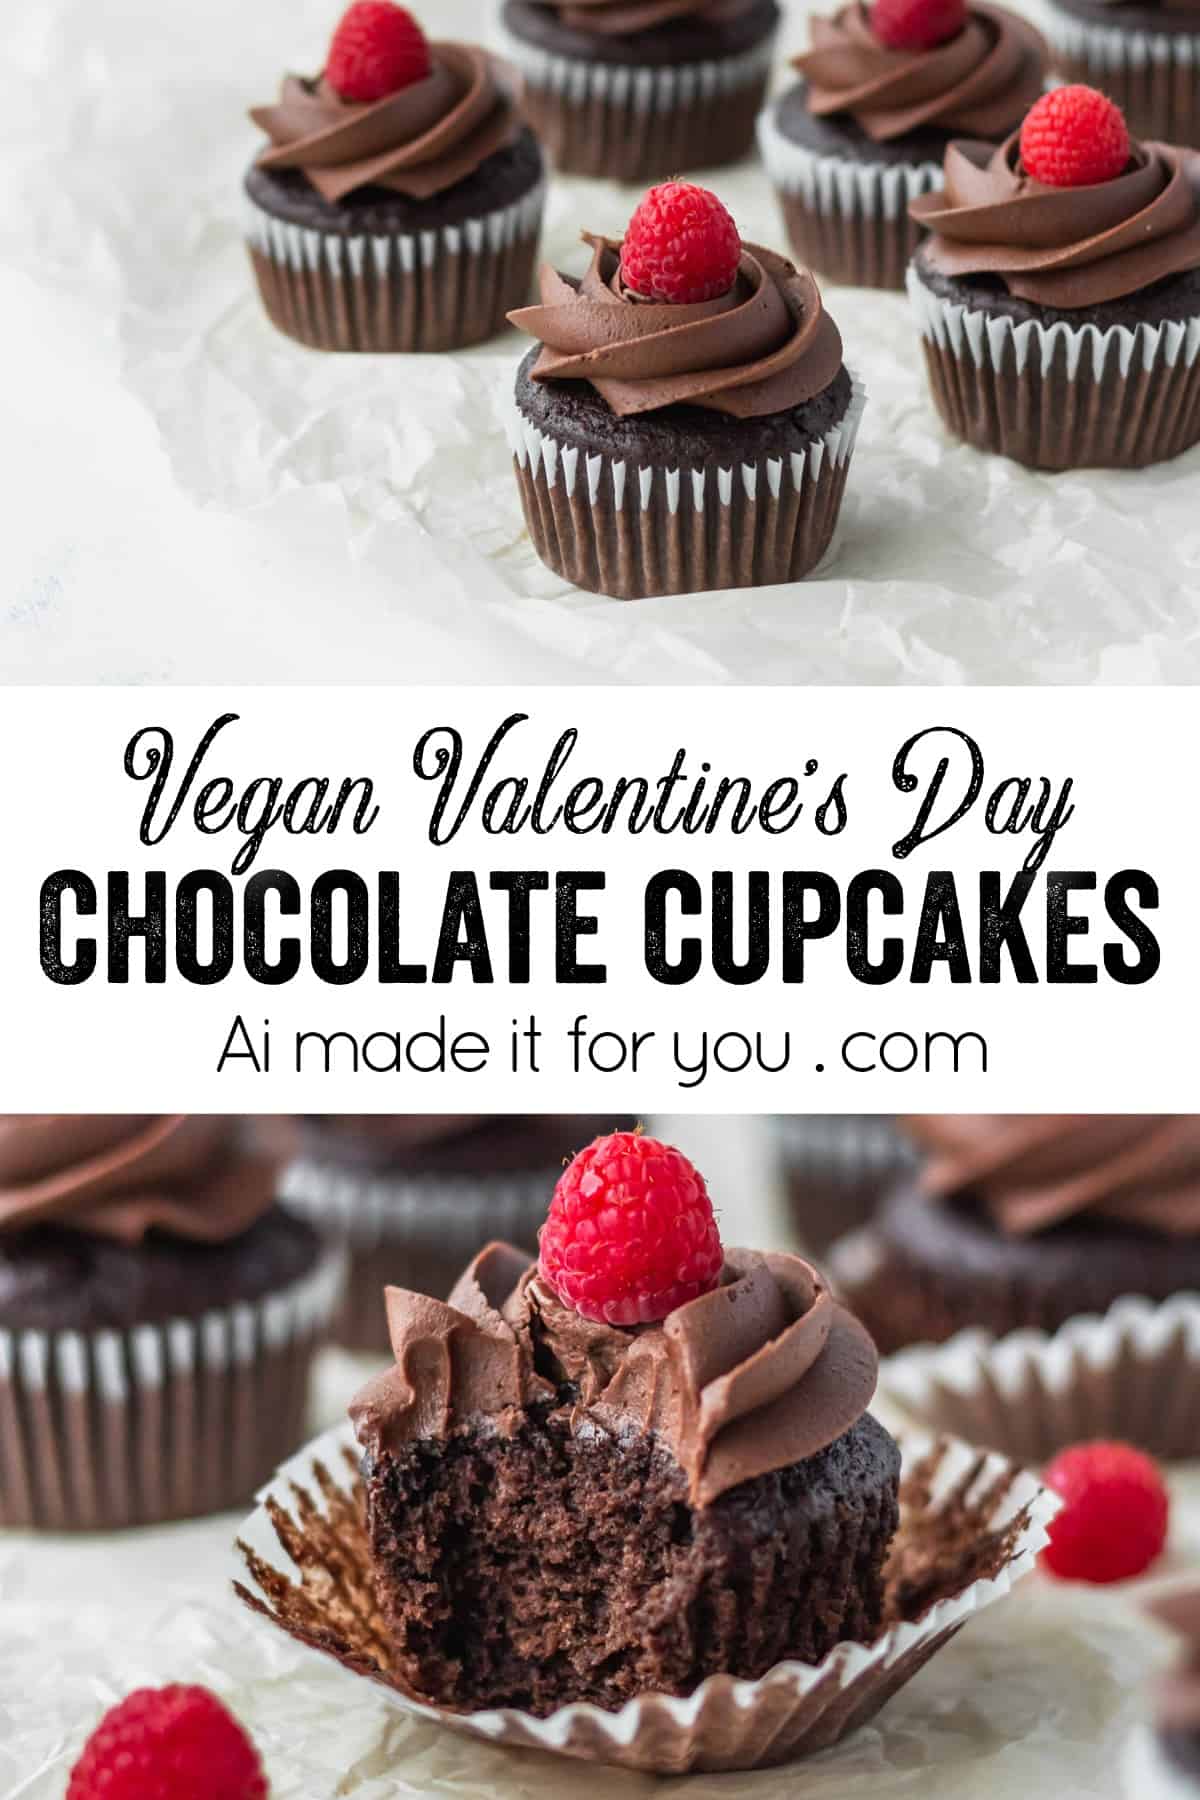 These vegan chocolate banana cupcakes are delicious and moist! Topped with creamy vegan chocolate buttercream and fresh raspberries! #chocolatecupcakes #bananacupcakes #valentinesdaydessert #veganvalentinesday #vegancupcakes